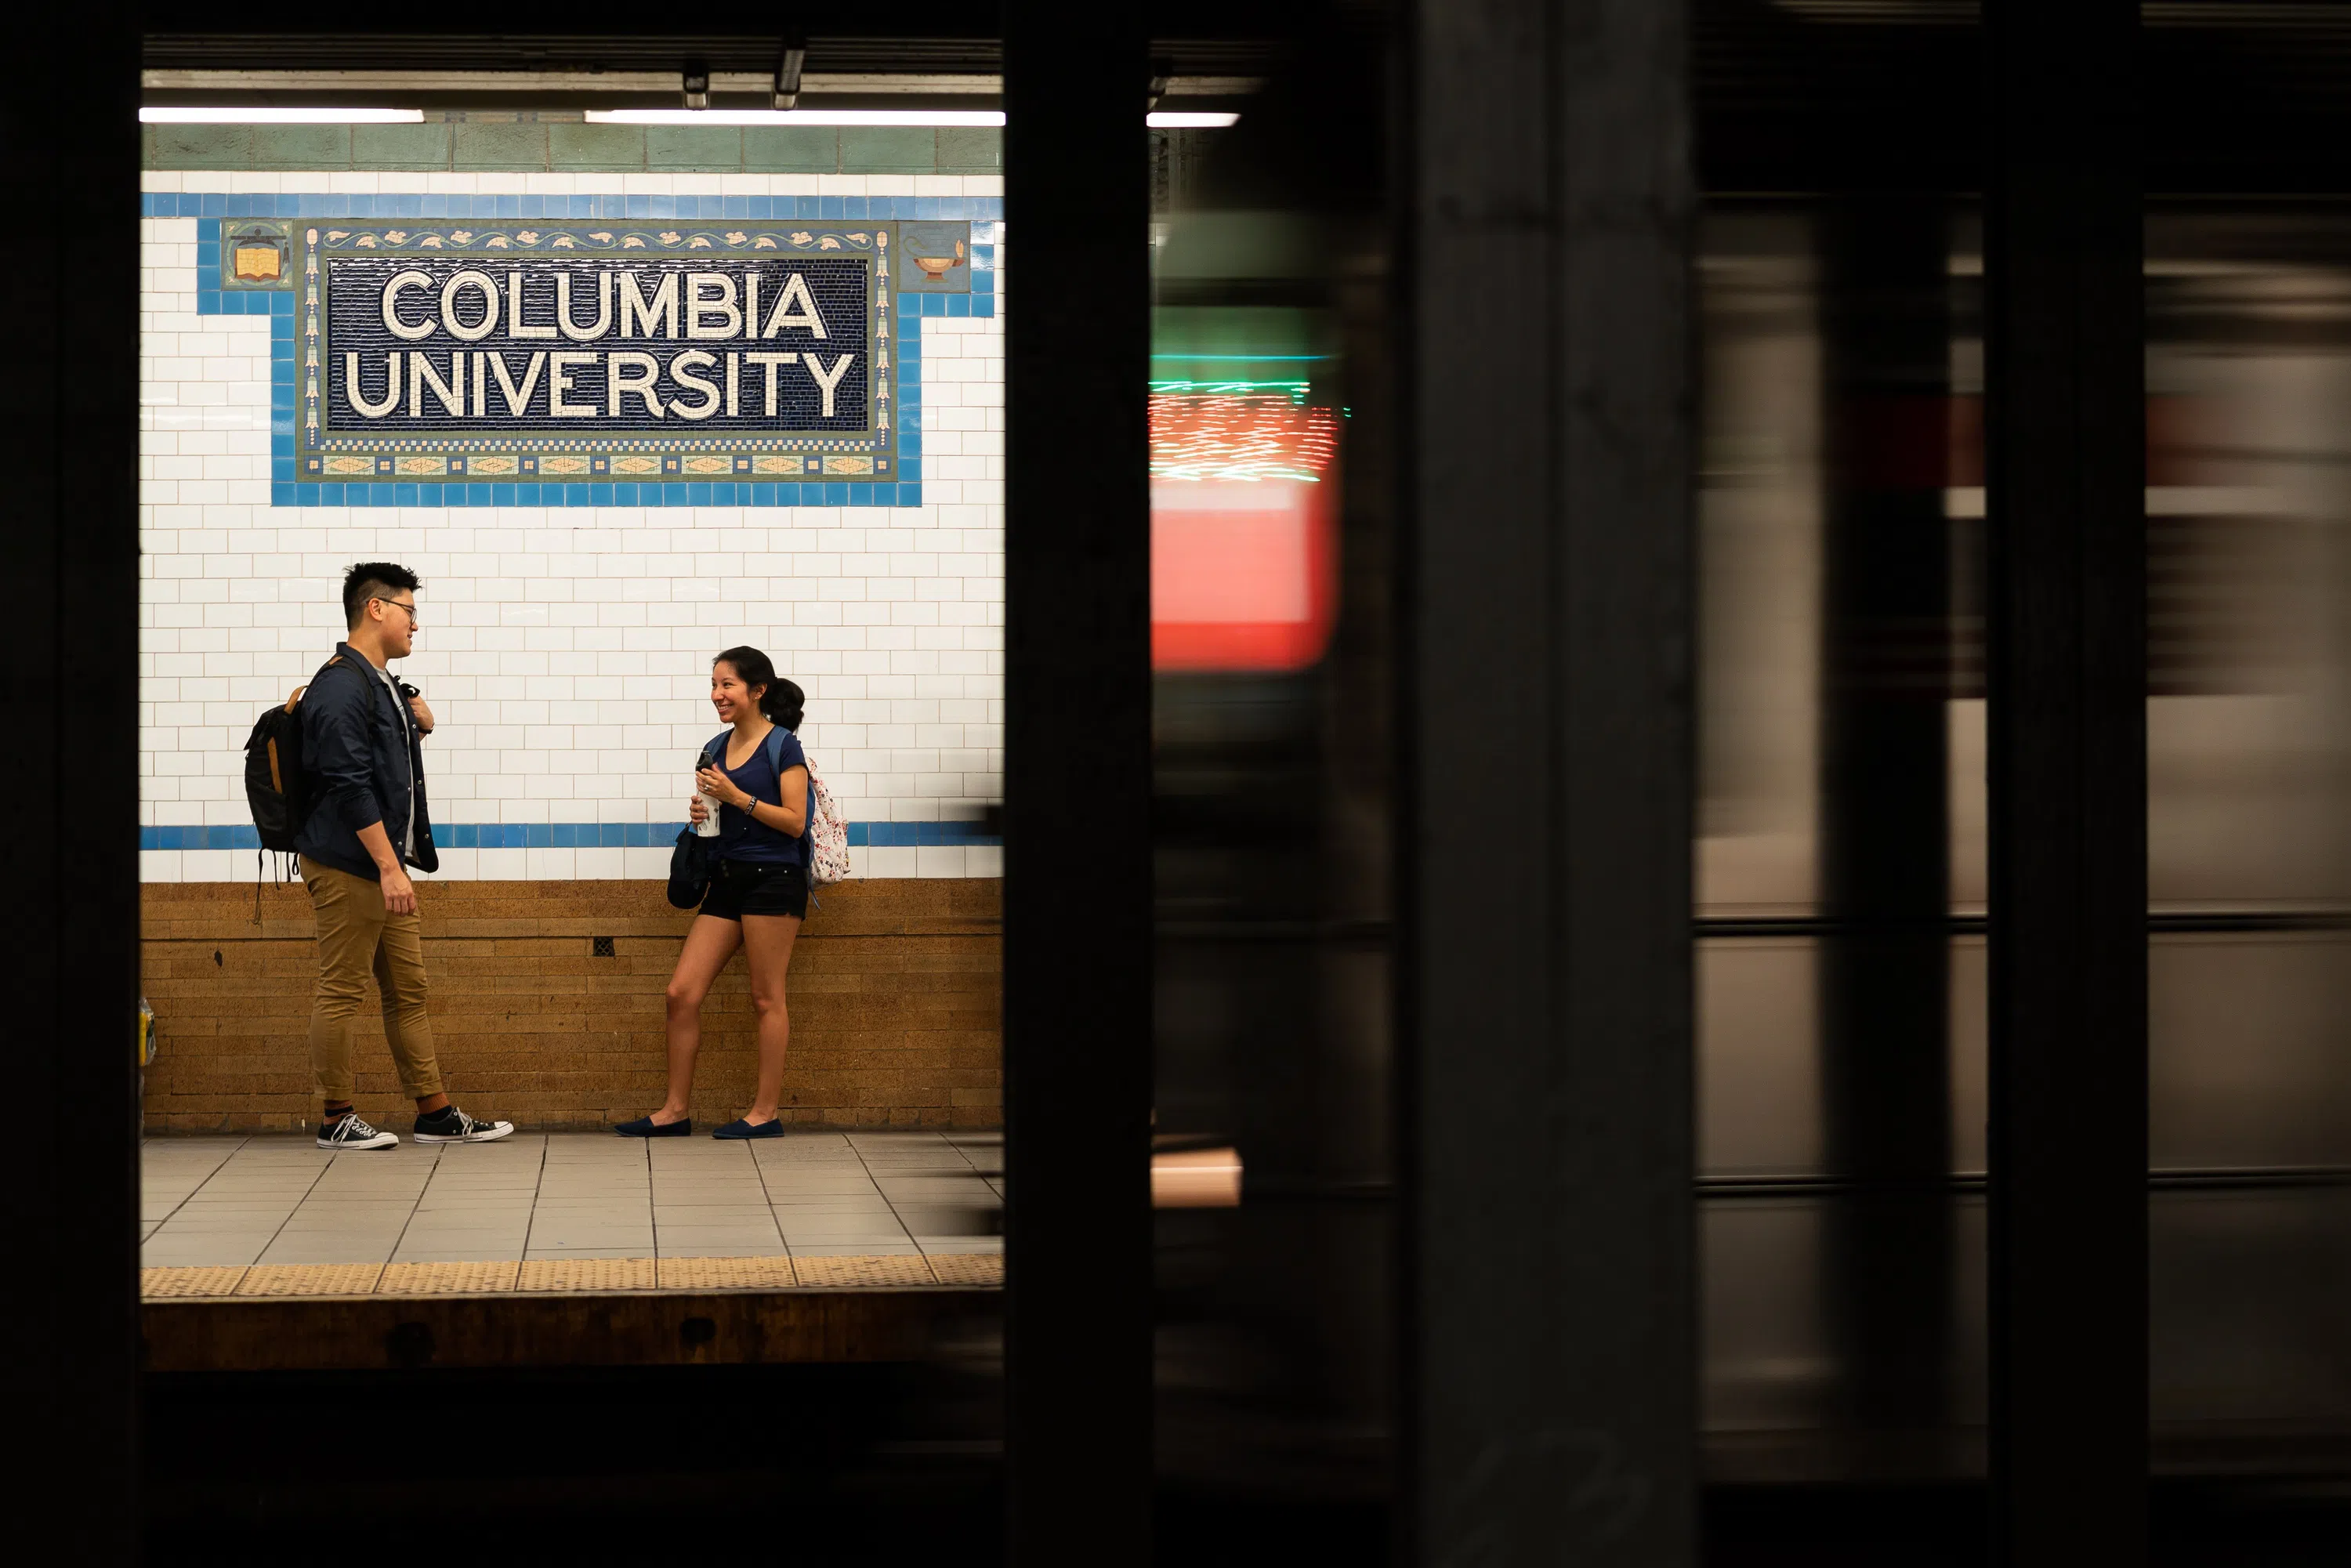 Two students stand on a subway platform as a train approaches; "Columbia University" is written on the wall in tile